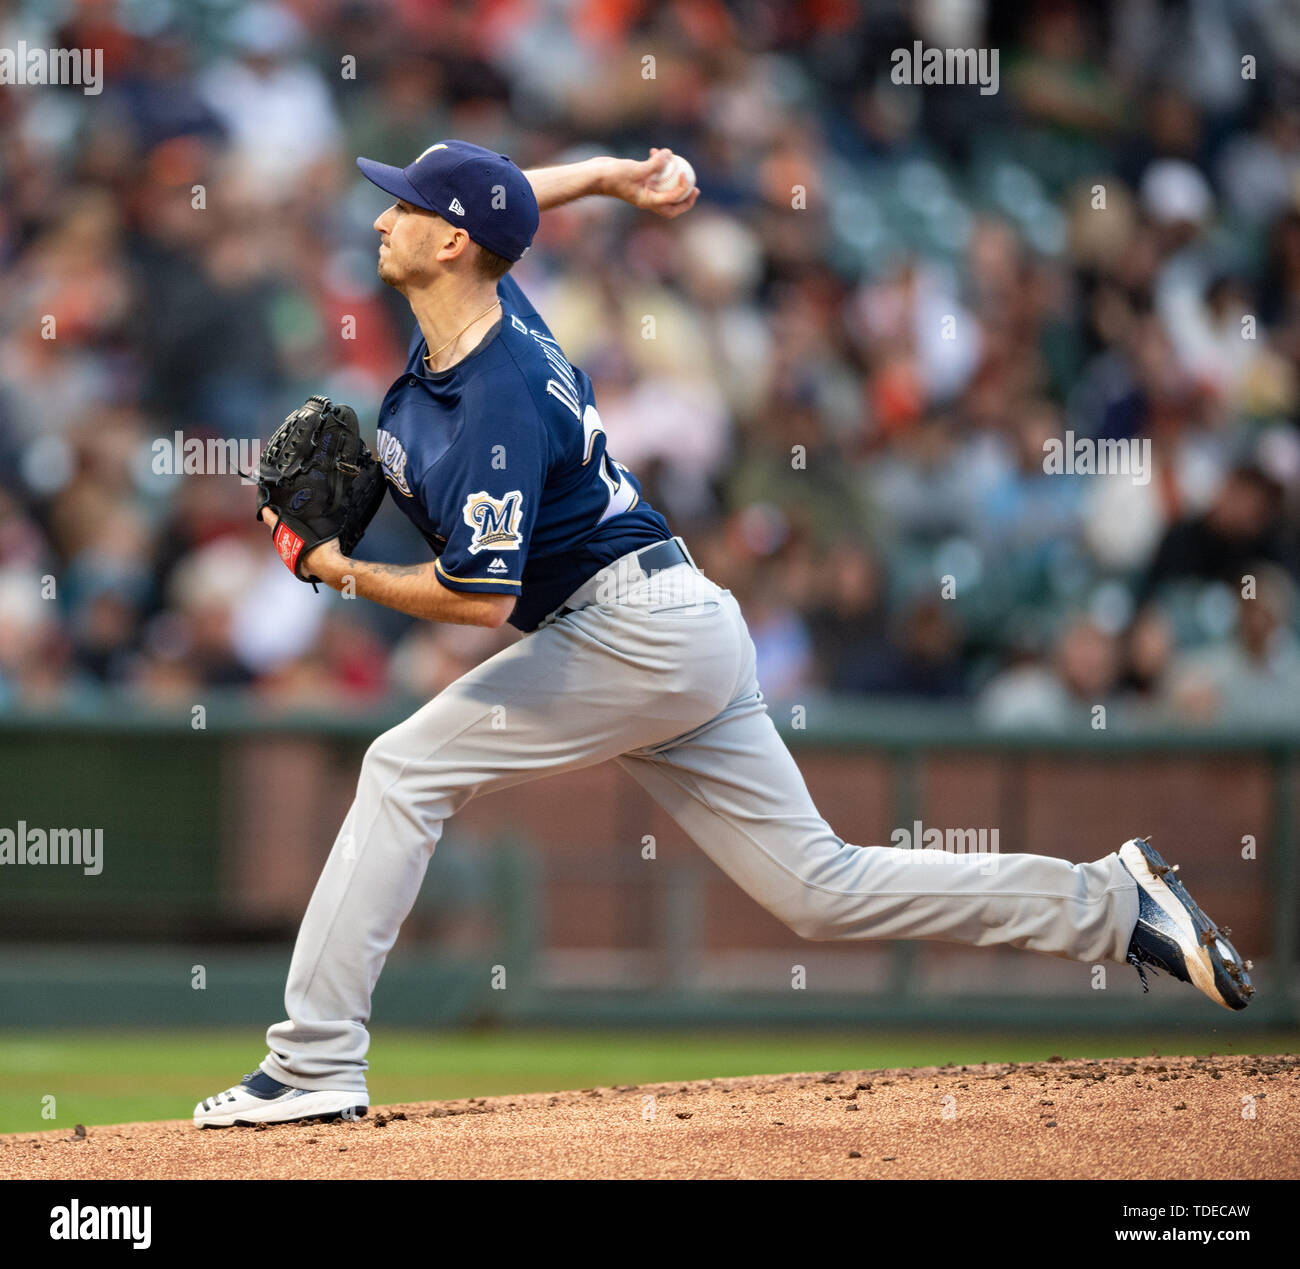 San Francisco, California, USA. 14th Sep, 2021. San Diego Padres starting  pitcher Jake Arrieta (49) waits for a signal from the catcher in the second  inning, during a MLB game between the